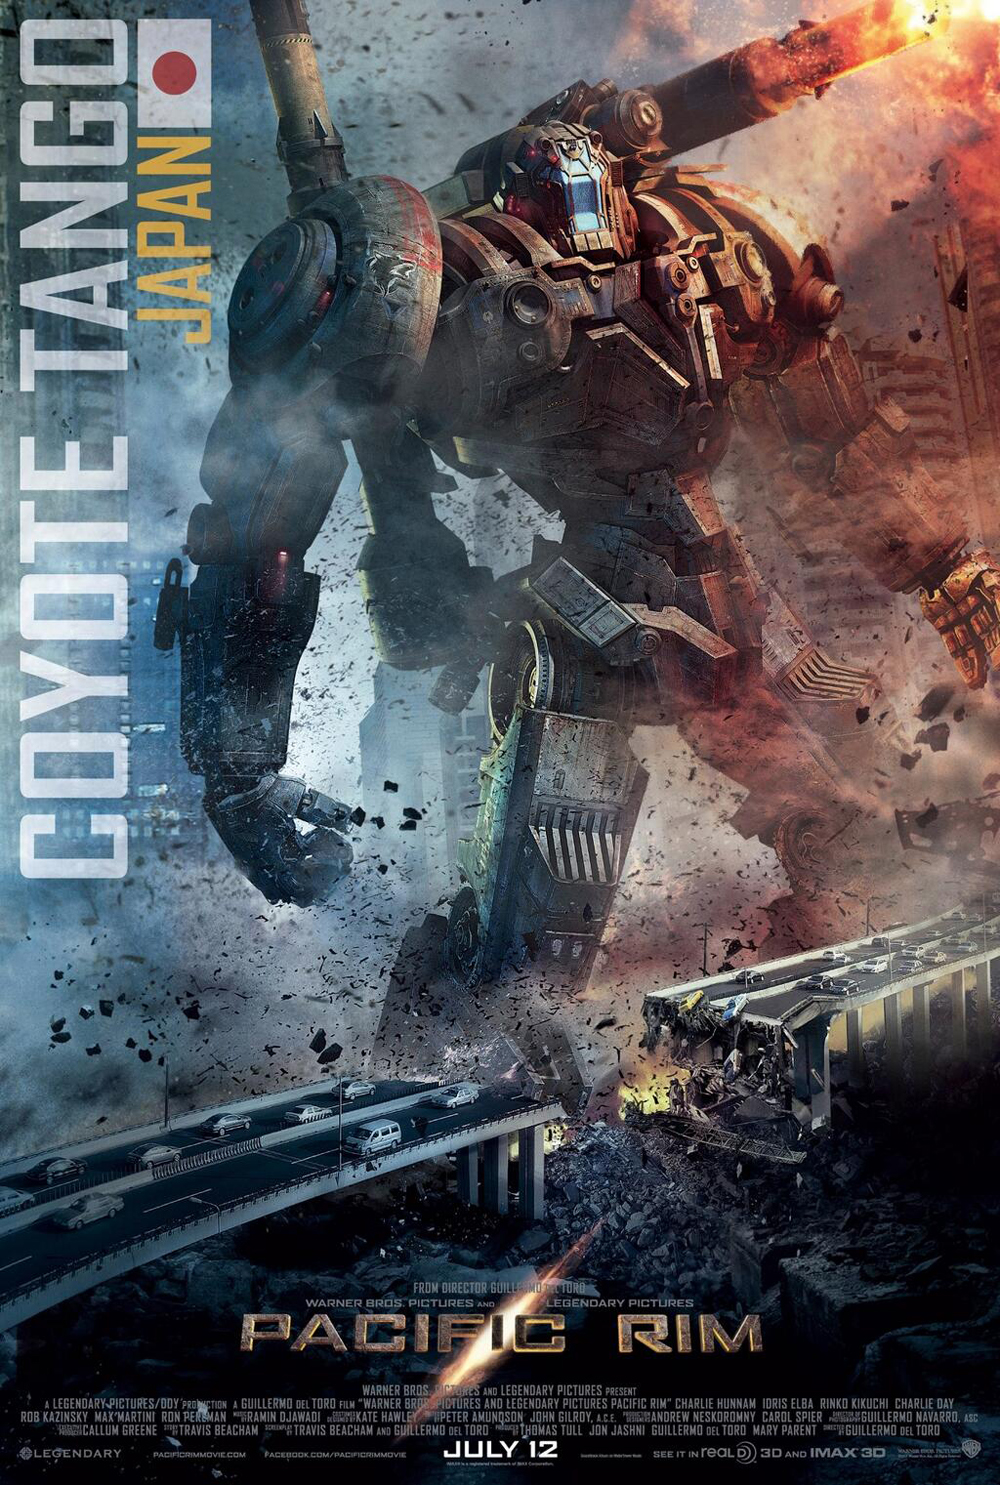 New Character Posters For Pacific Rim Jaegers Have Arrived